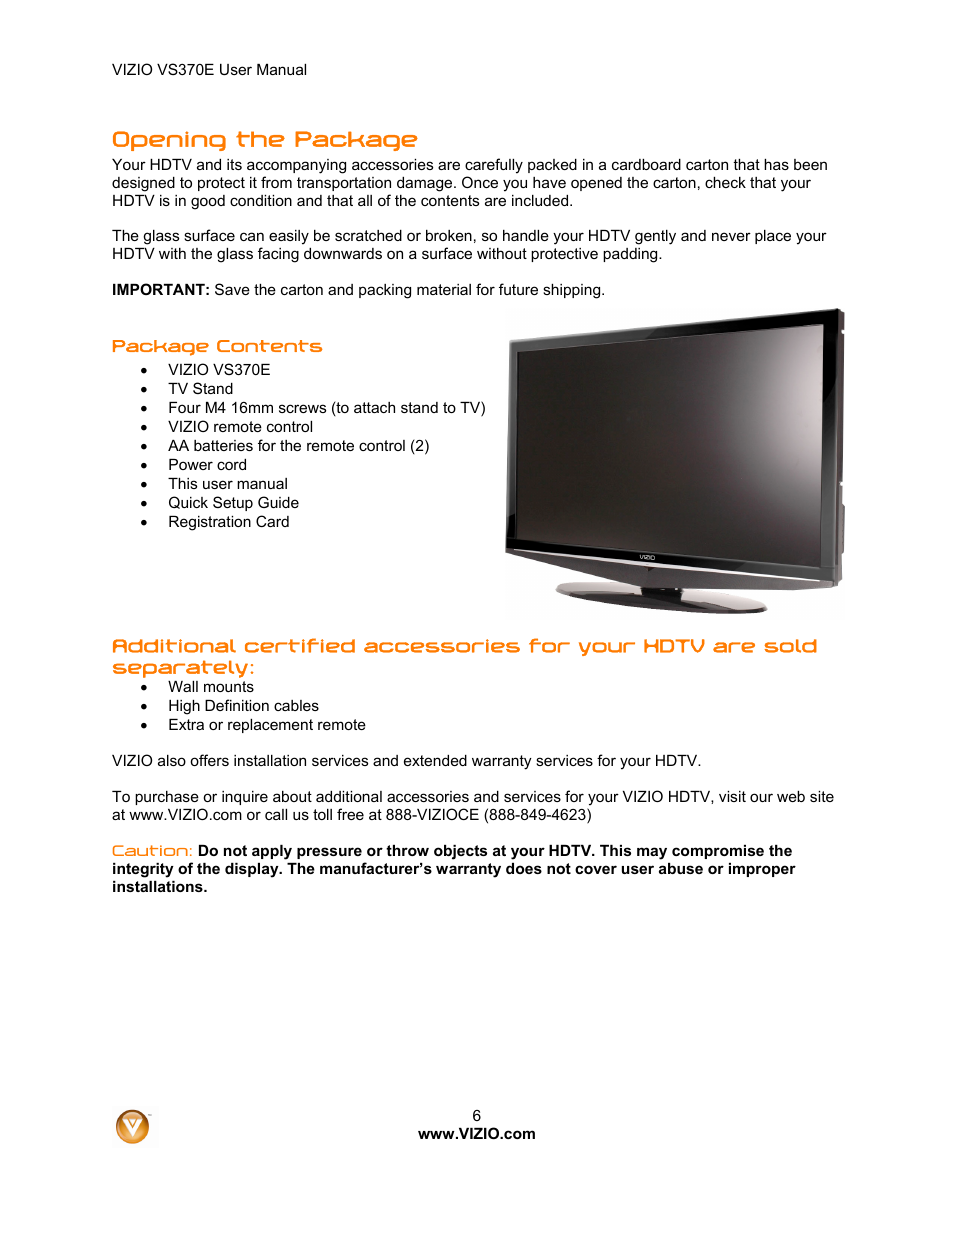 Opening the package | Vizio VS370E User Manual | Page 6 / 43